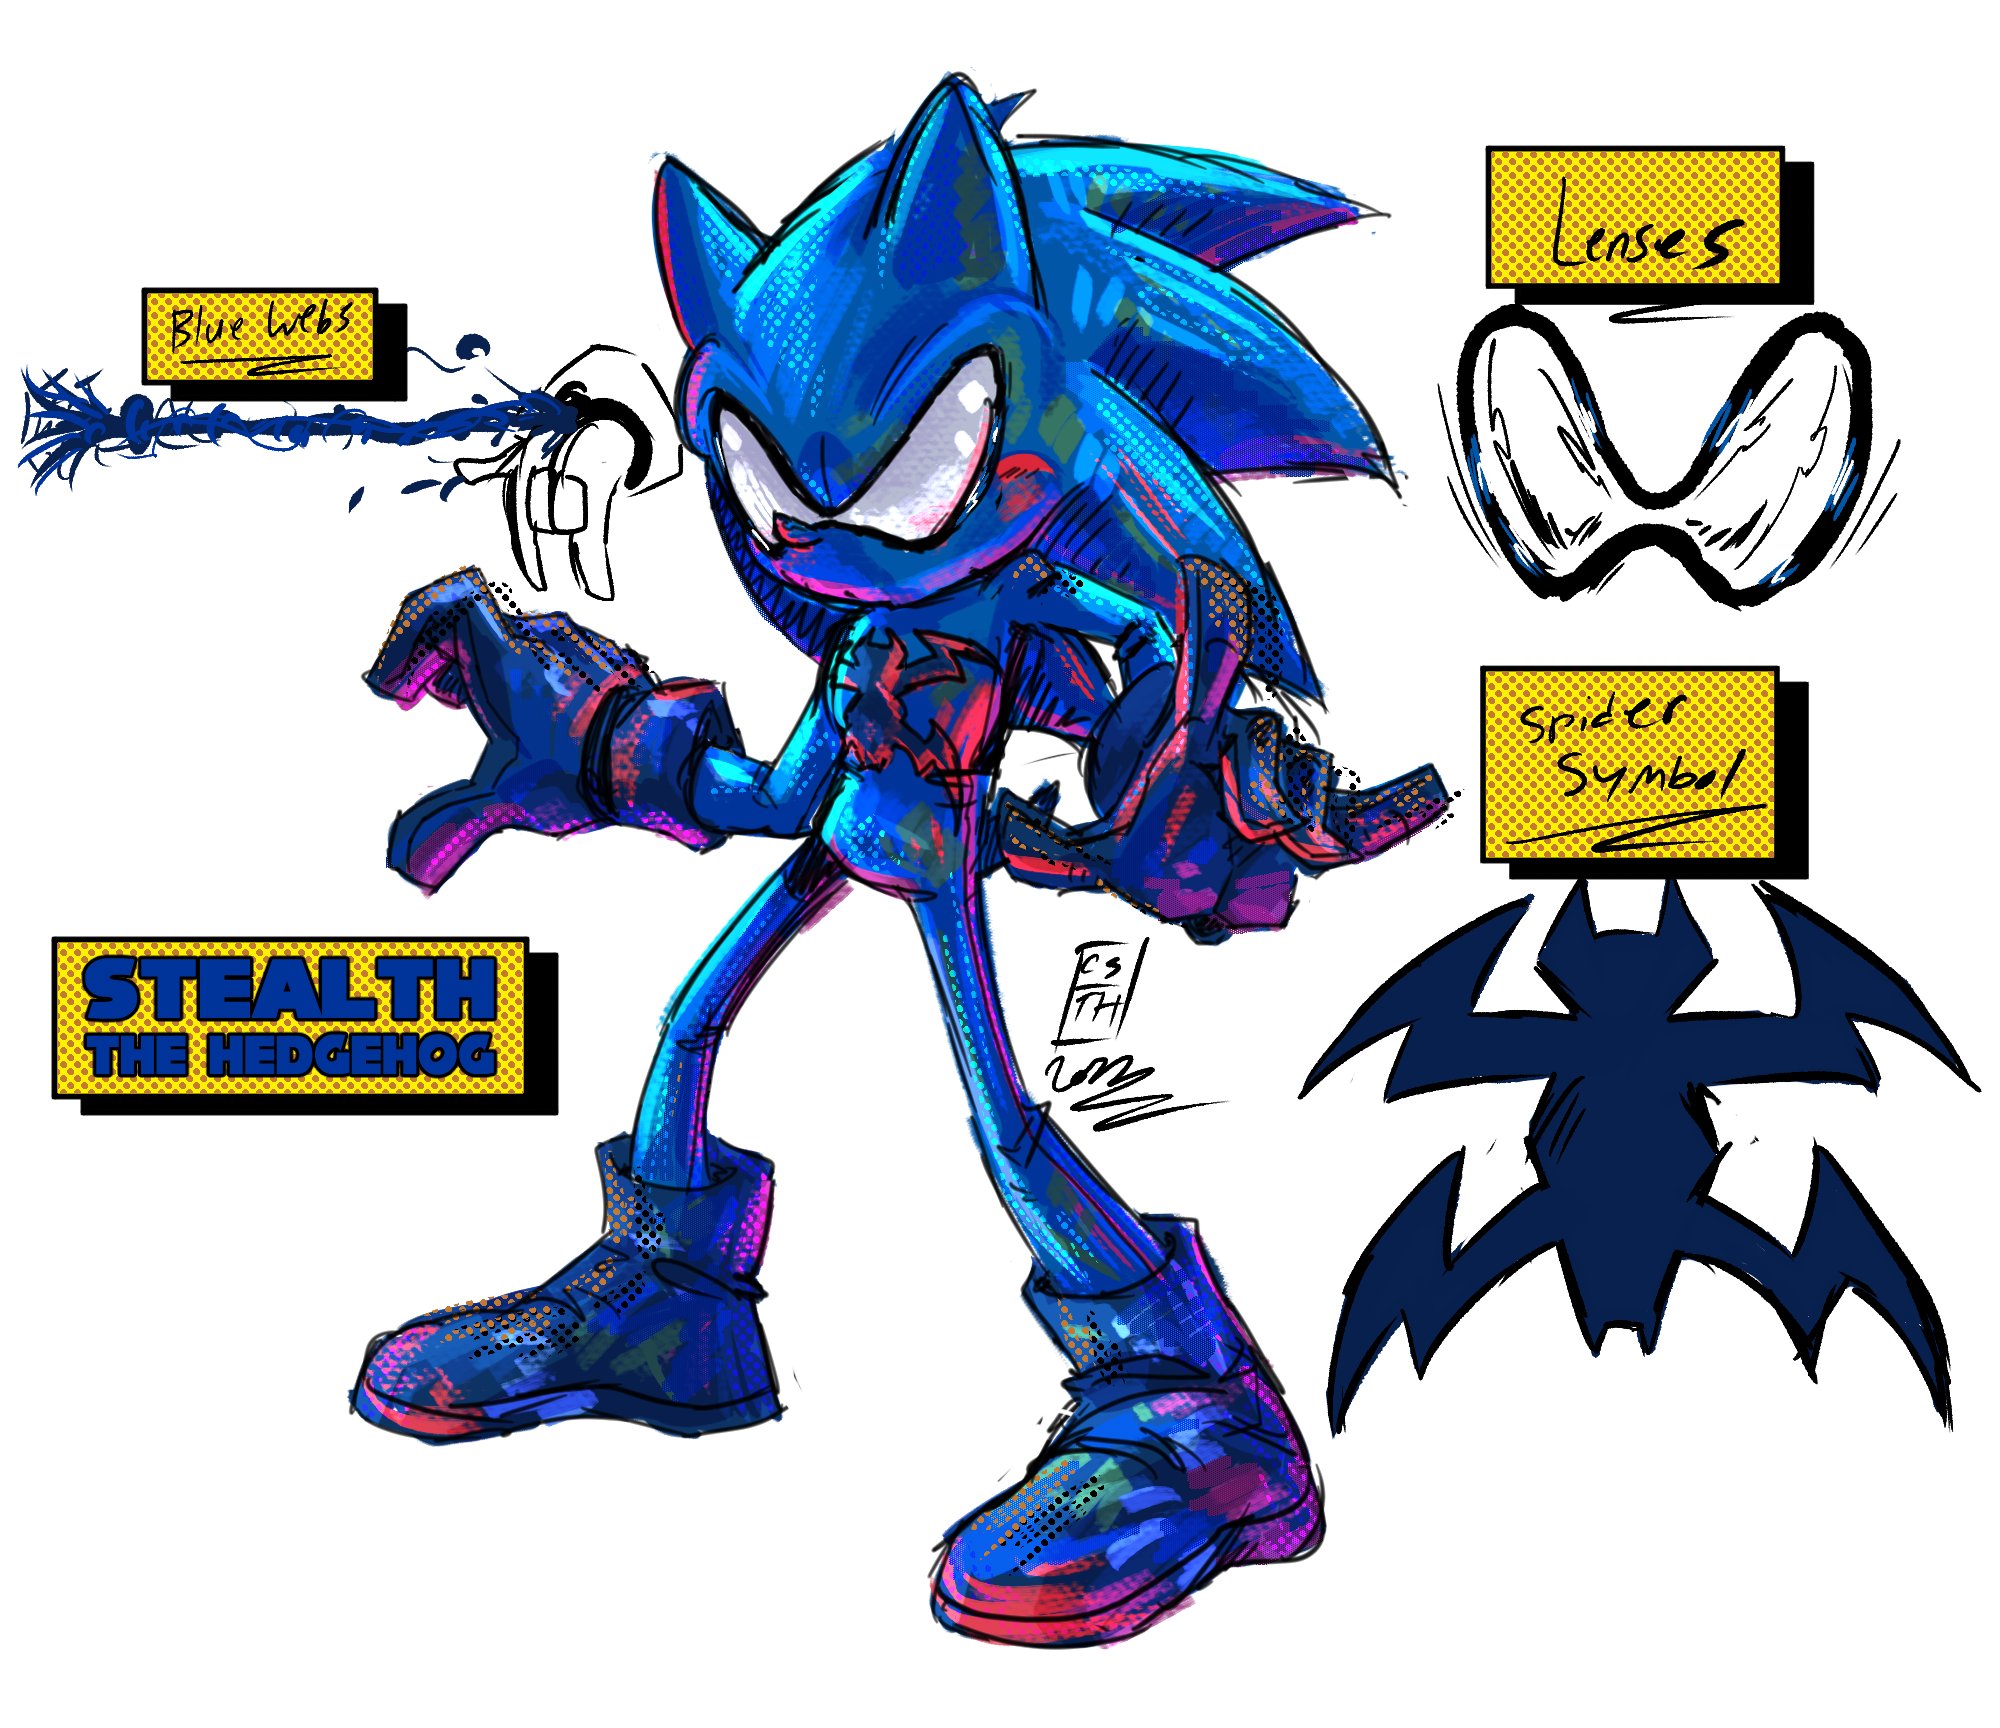 STEALTH SONIC AND STEALTH SILVER 99 MEET EMERALD STEALTH [SCOURGE] IN VR  CHAT! 